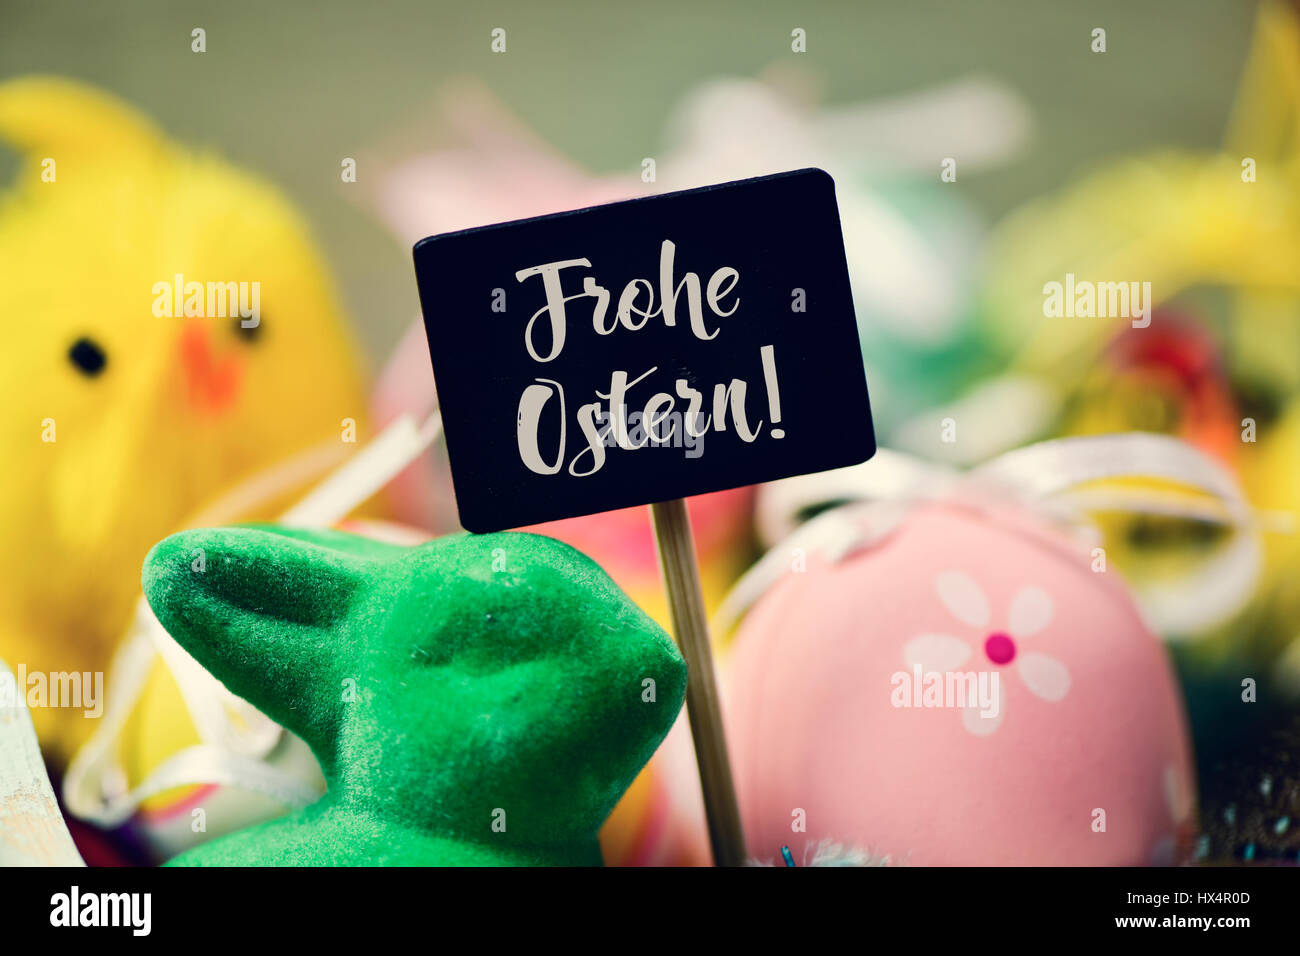 a chalkboard with the text frohe ostern, happy easter in german written in it and a pile of decorated easter eggs of different colors, a green rabbit  Stock Photo